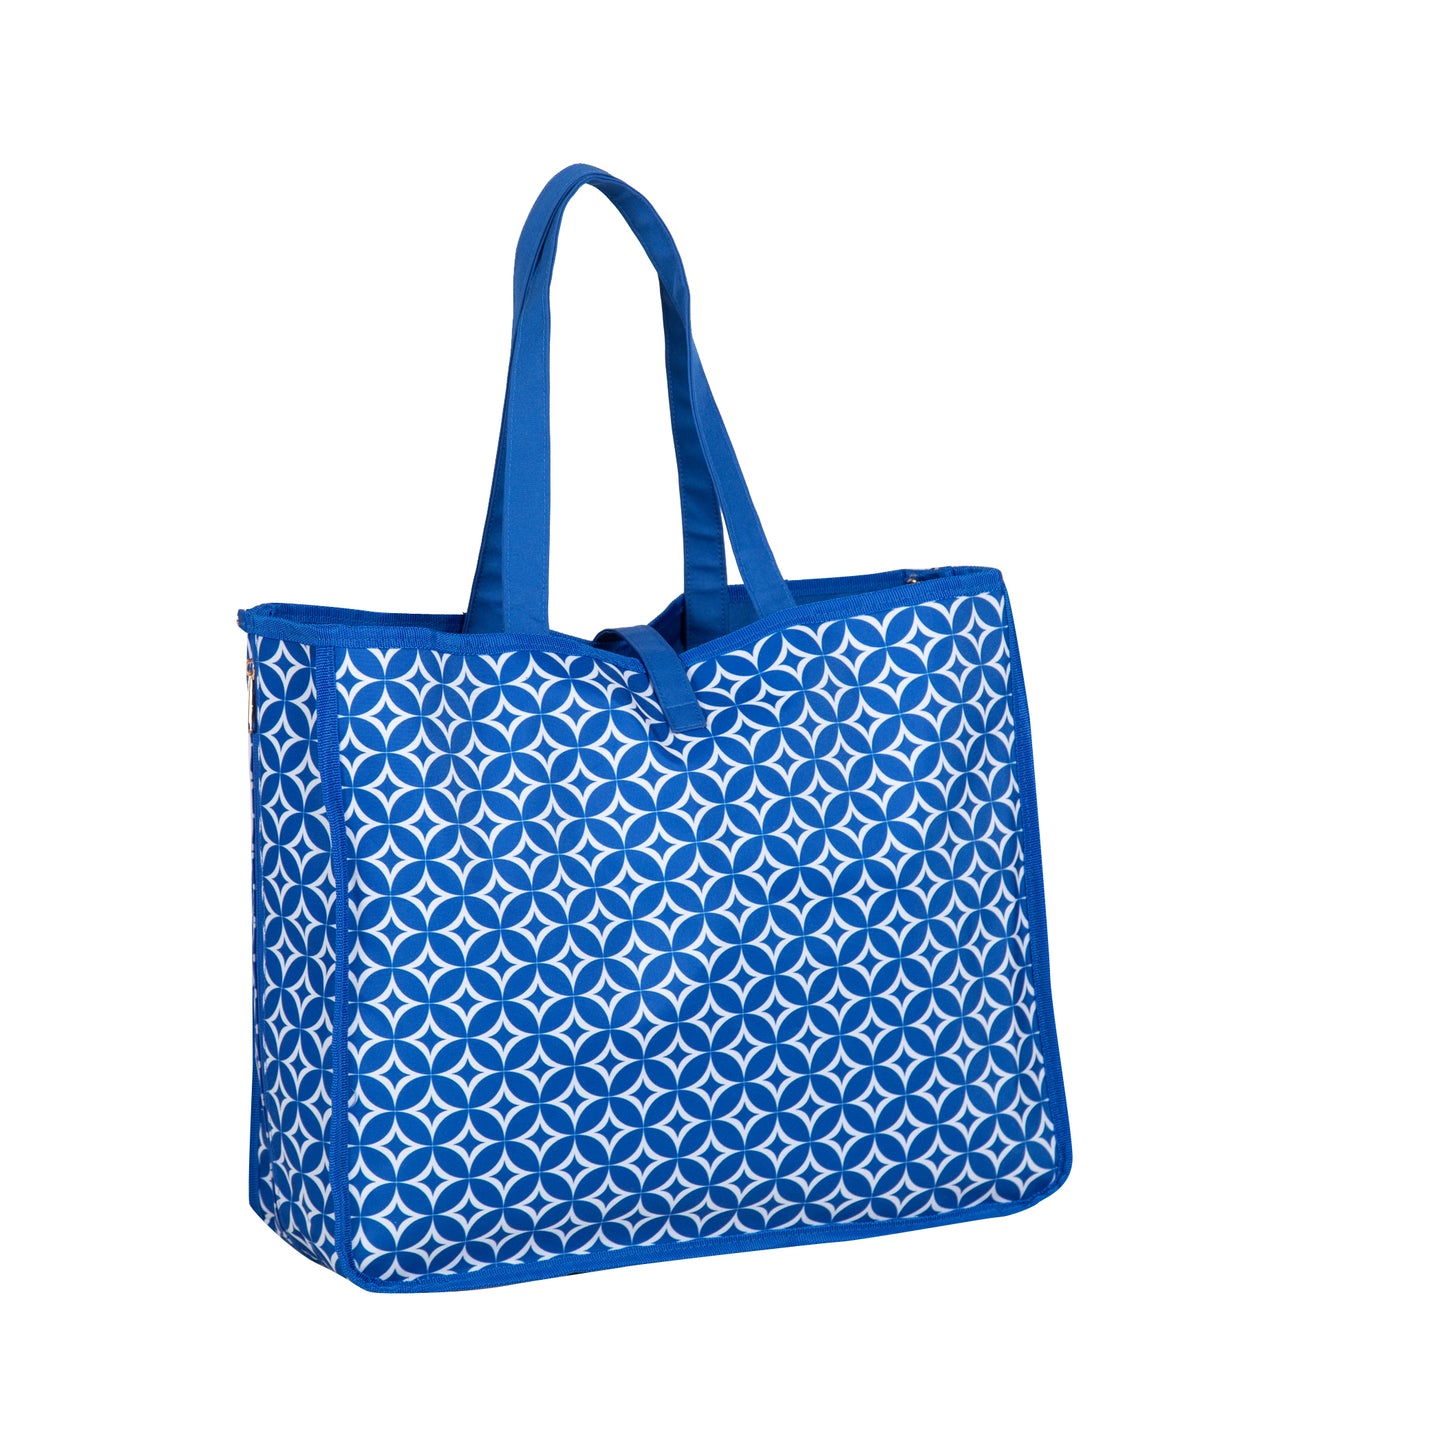 Jenni Chan Stars Reversible 2-in-1 Carry-All Tote